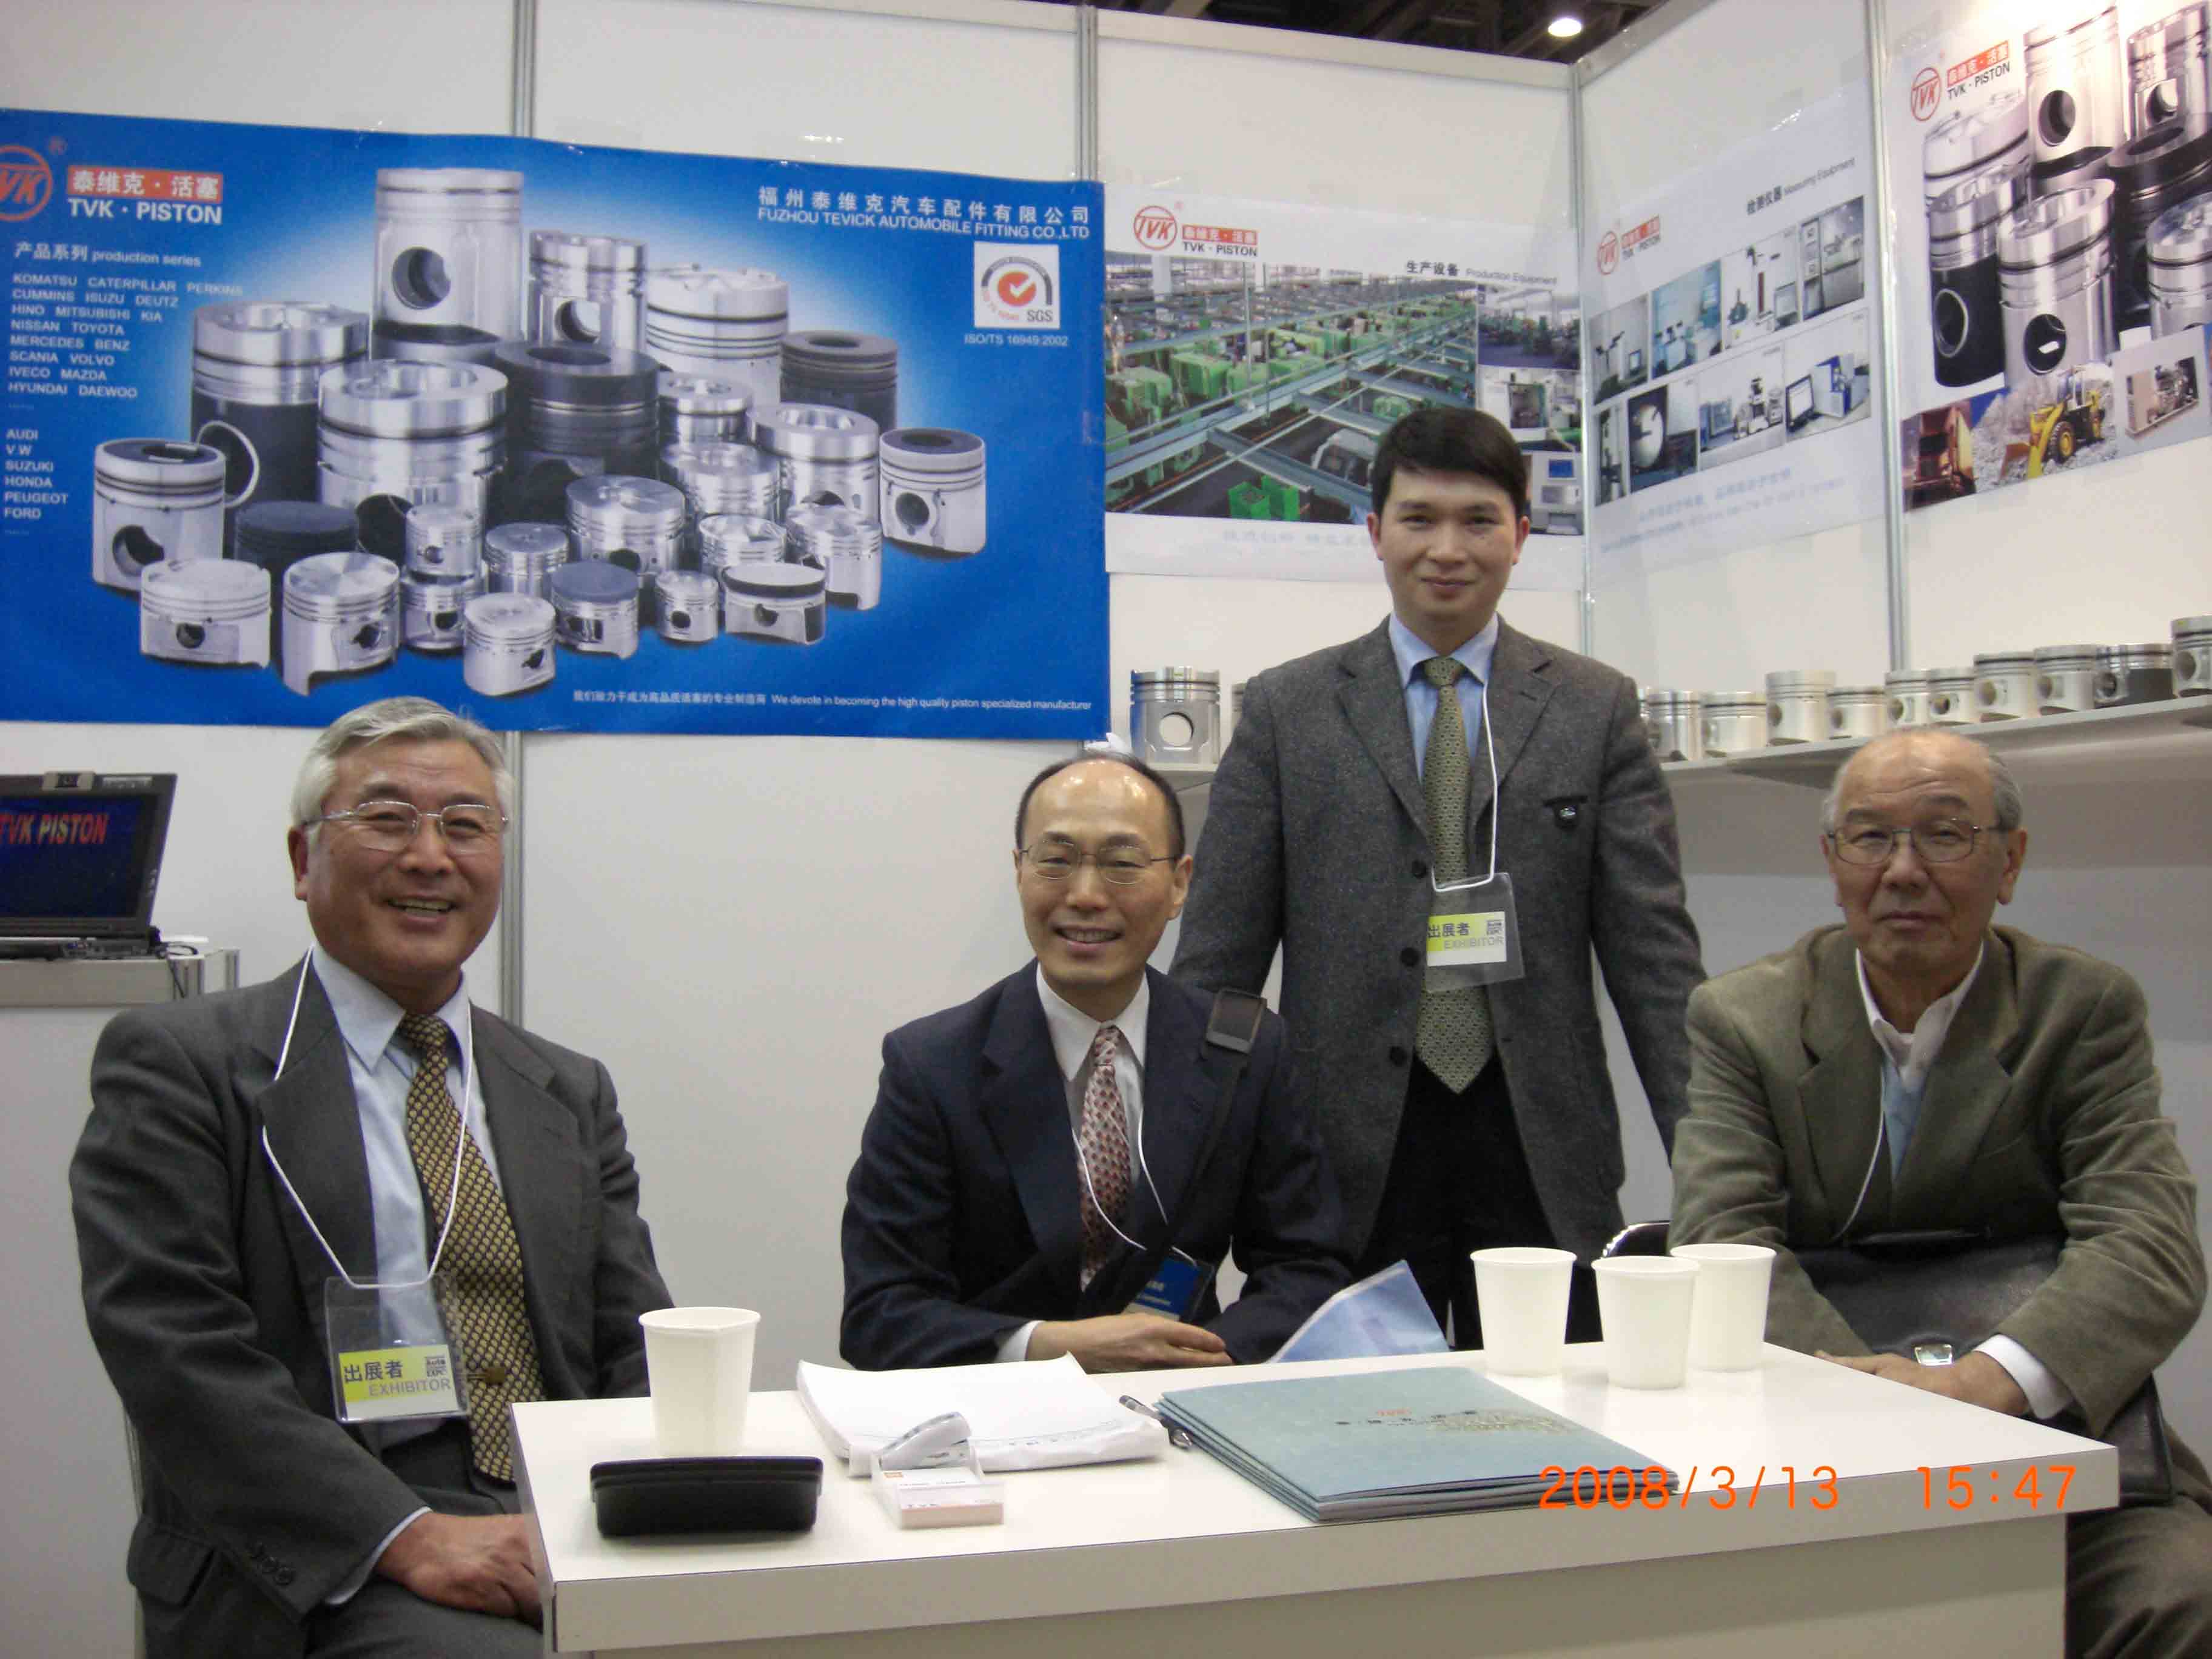 The 6th International Auto Aftermarket EXPO Tokyo